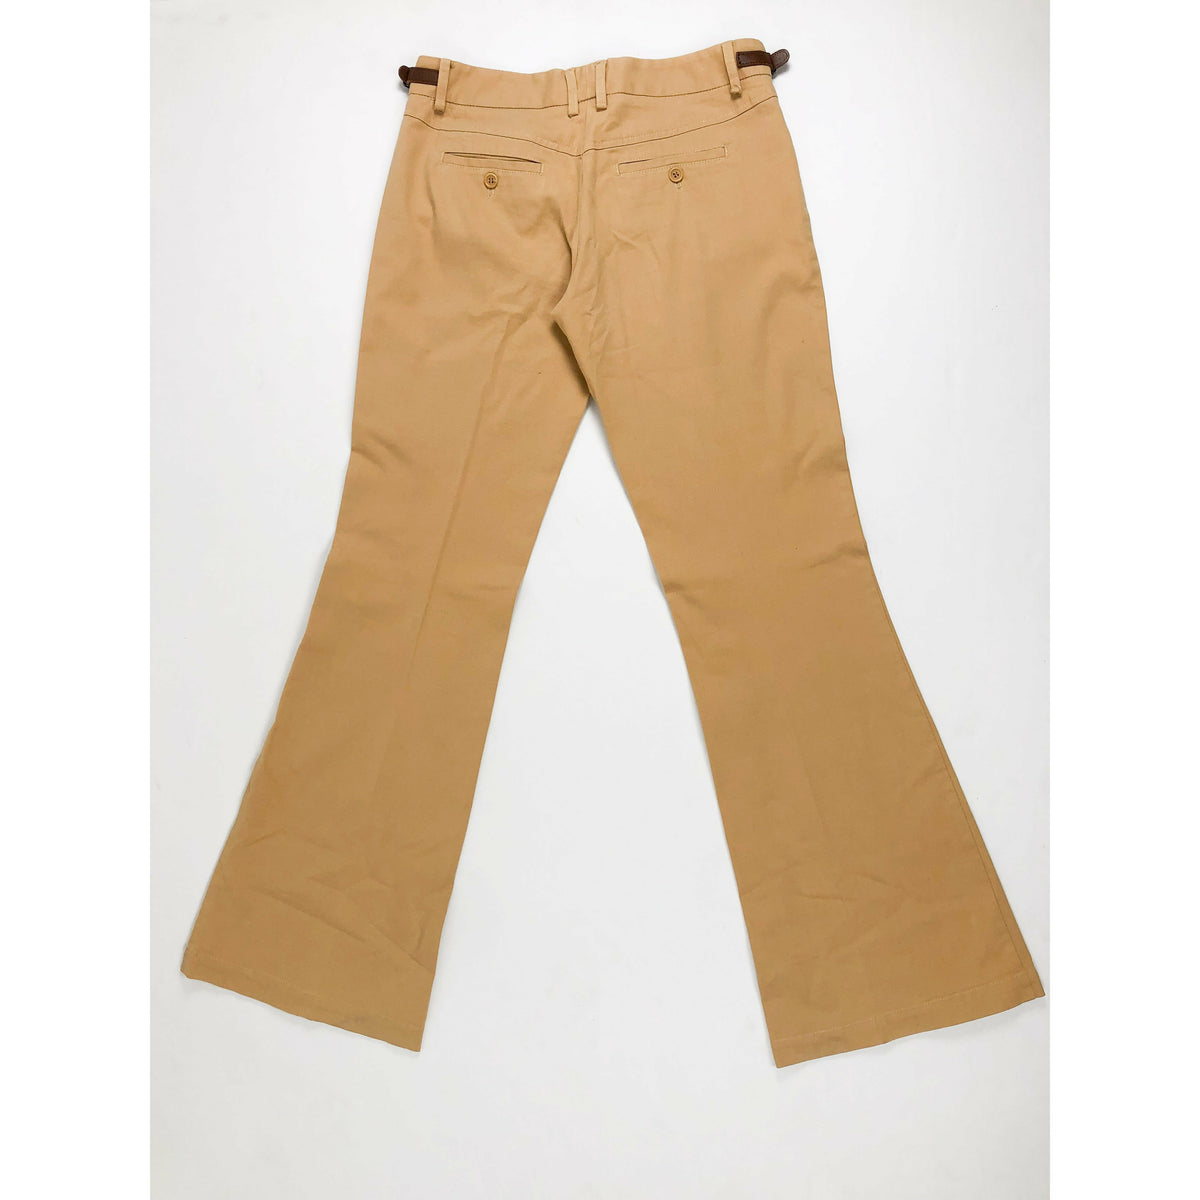 BCBG MAX AZRIA - Tan pants with belt attached